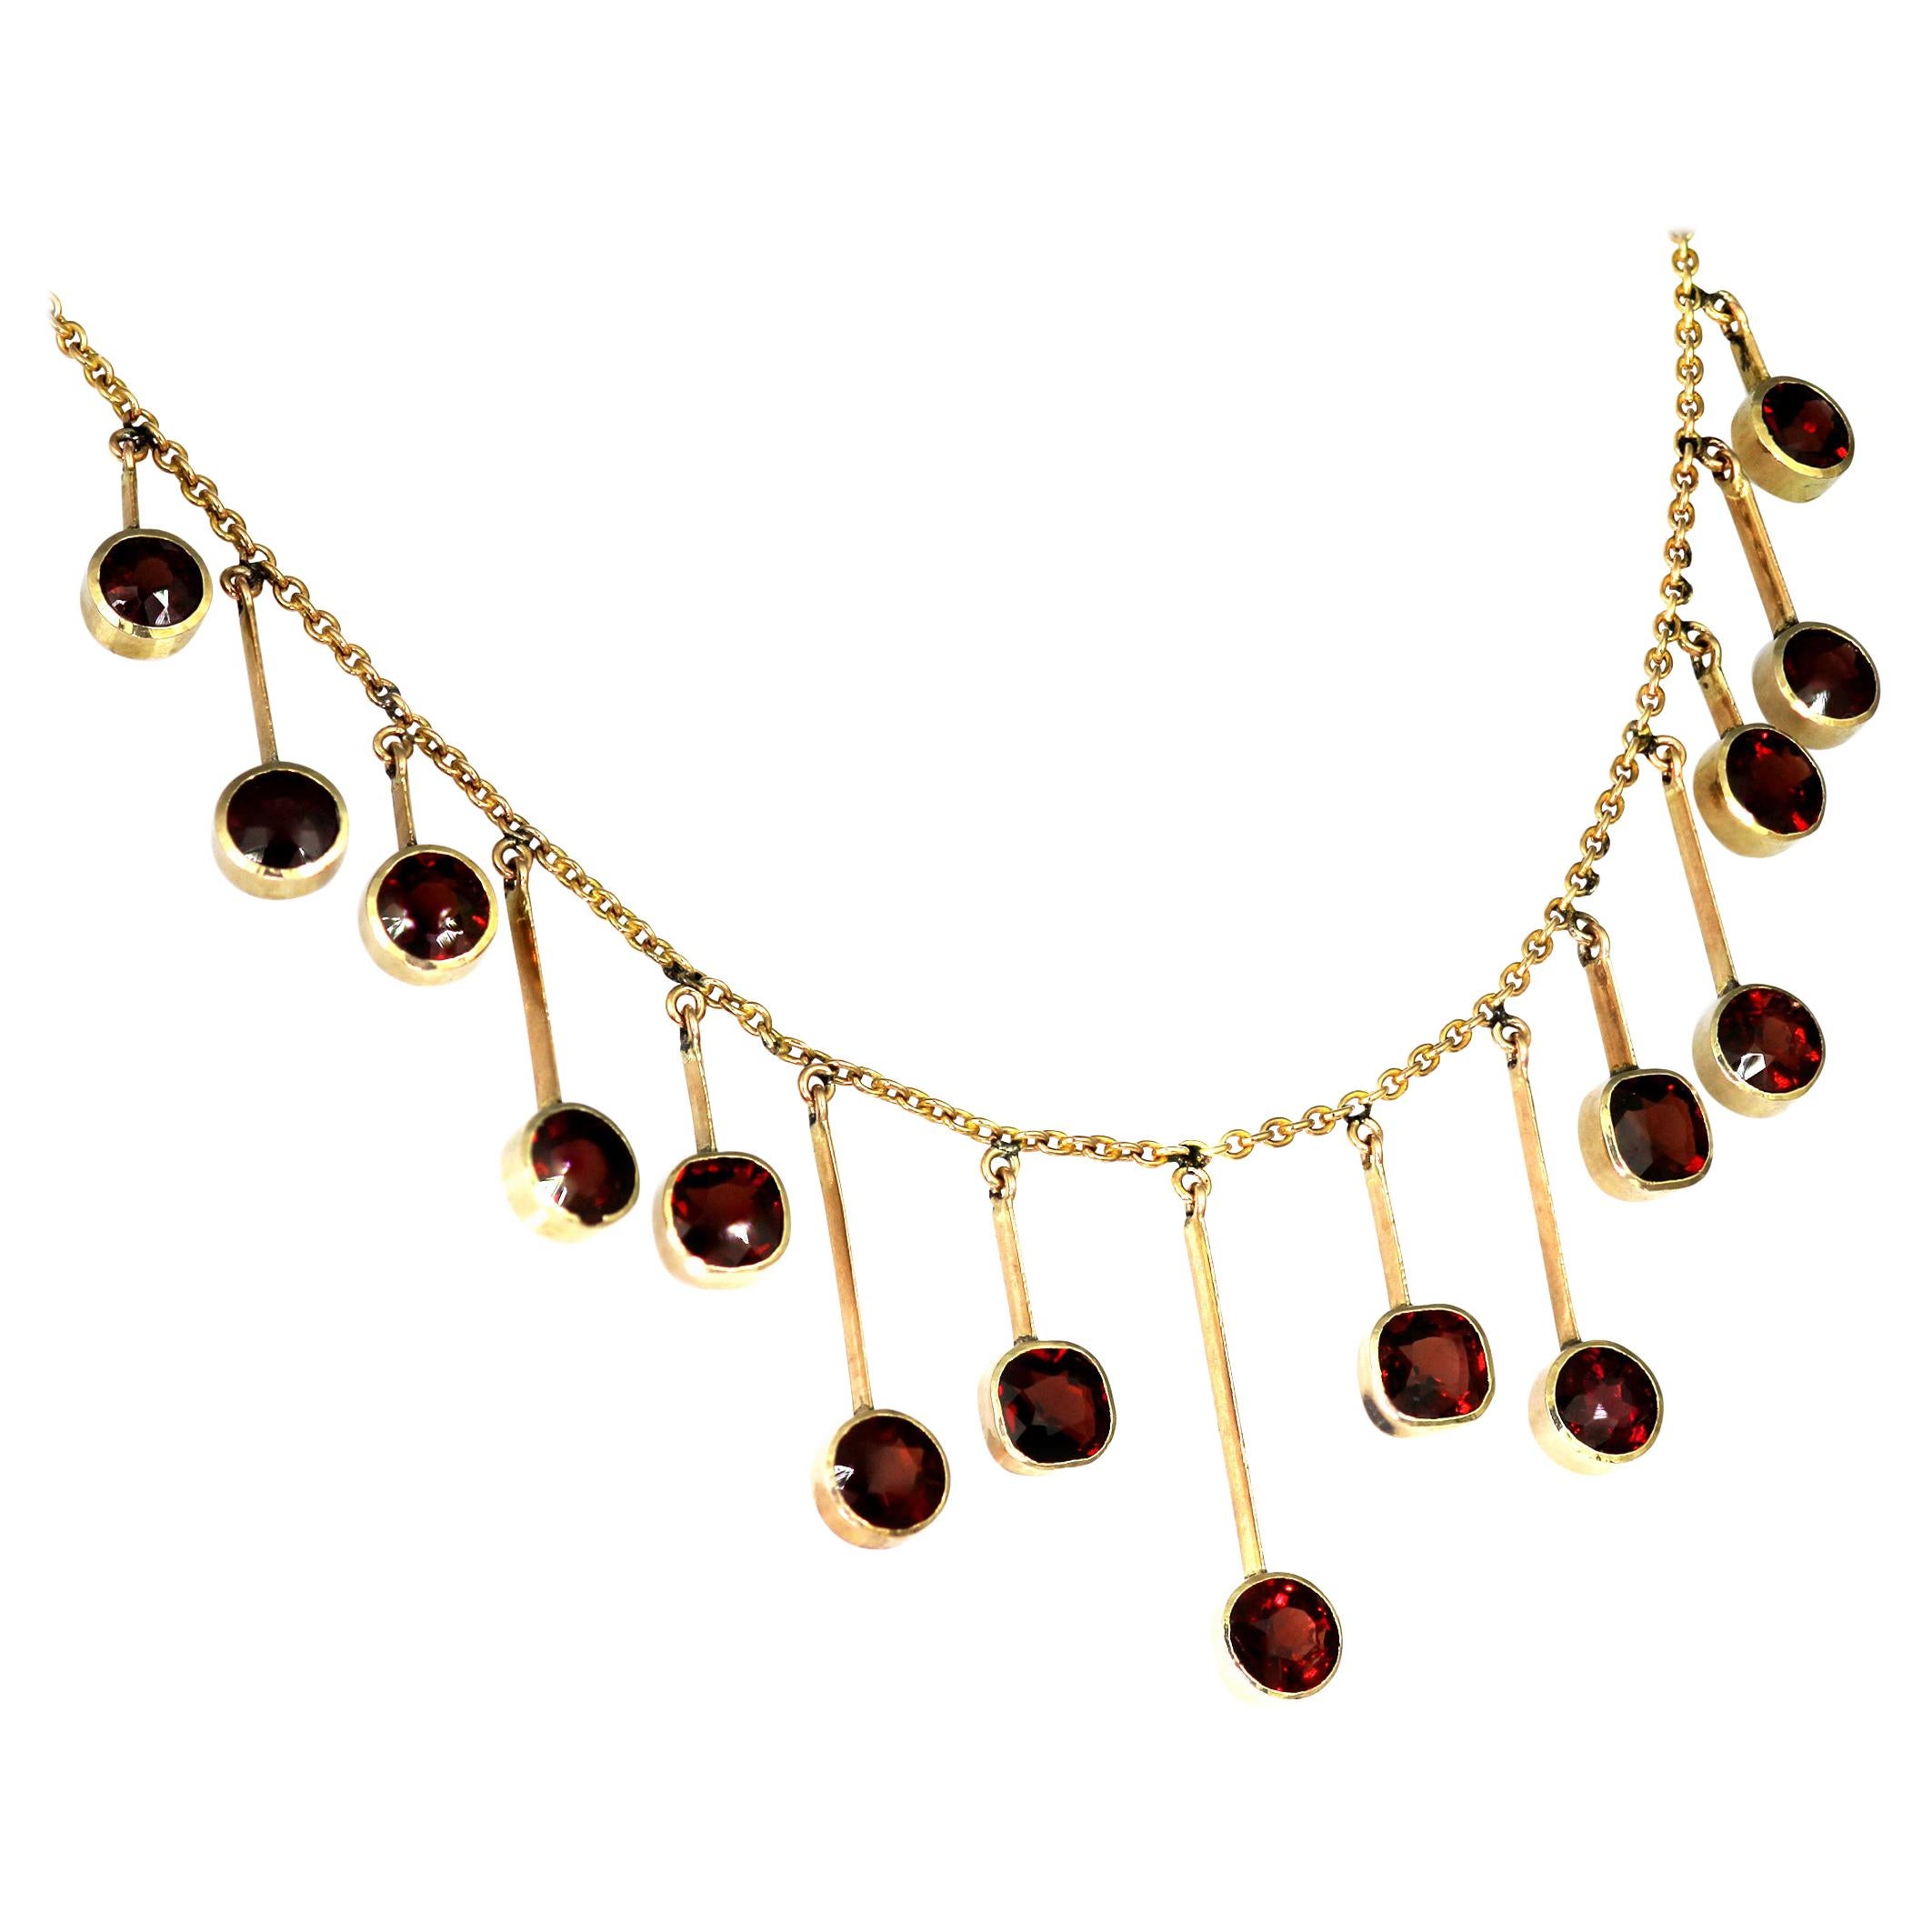 Antique Victorian 19th Century Garnet Fringe, Drop Necklace in Yellow Gold